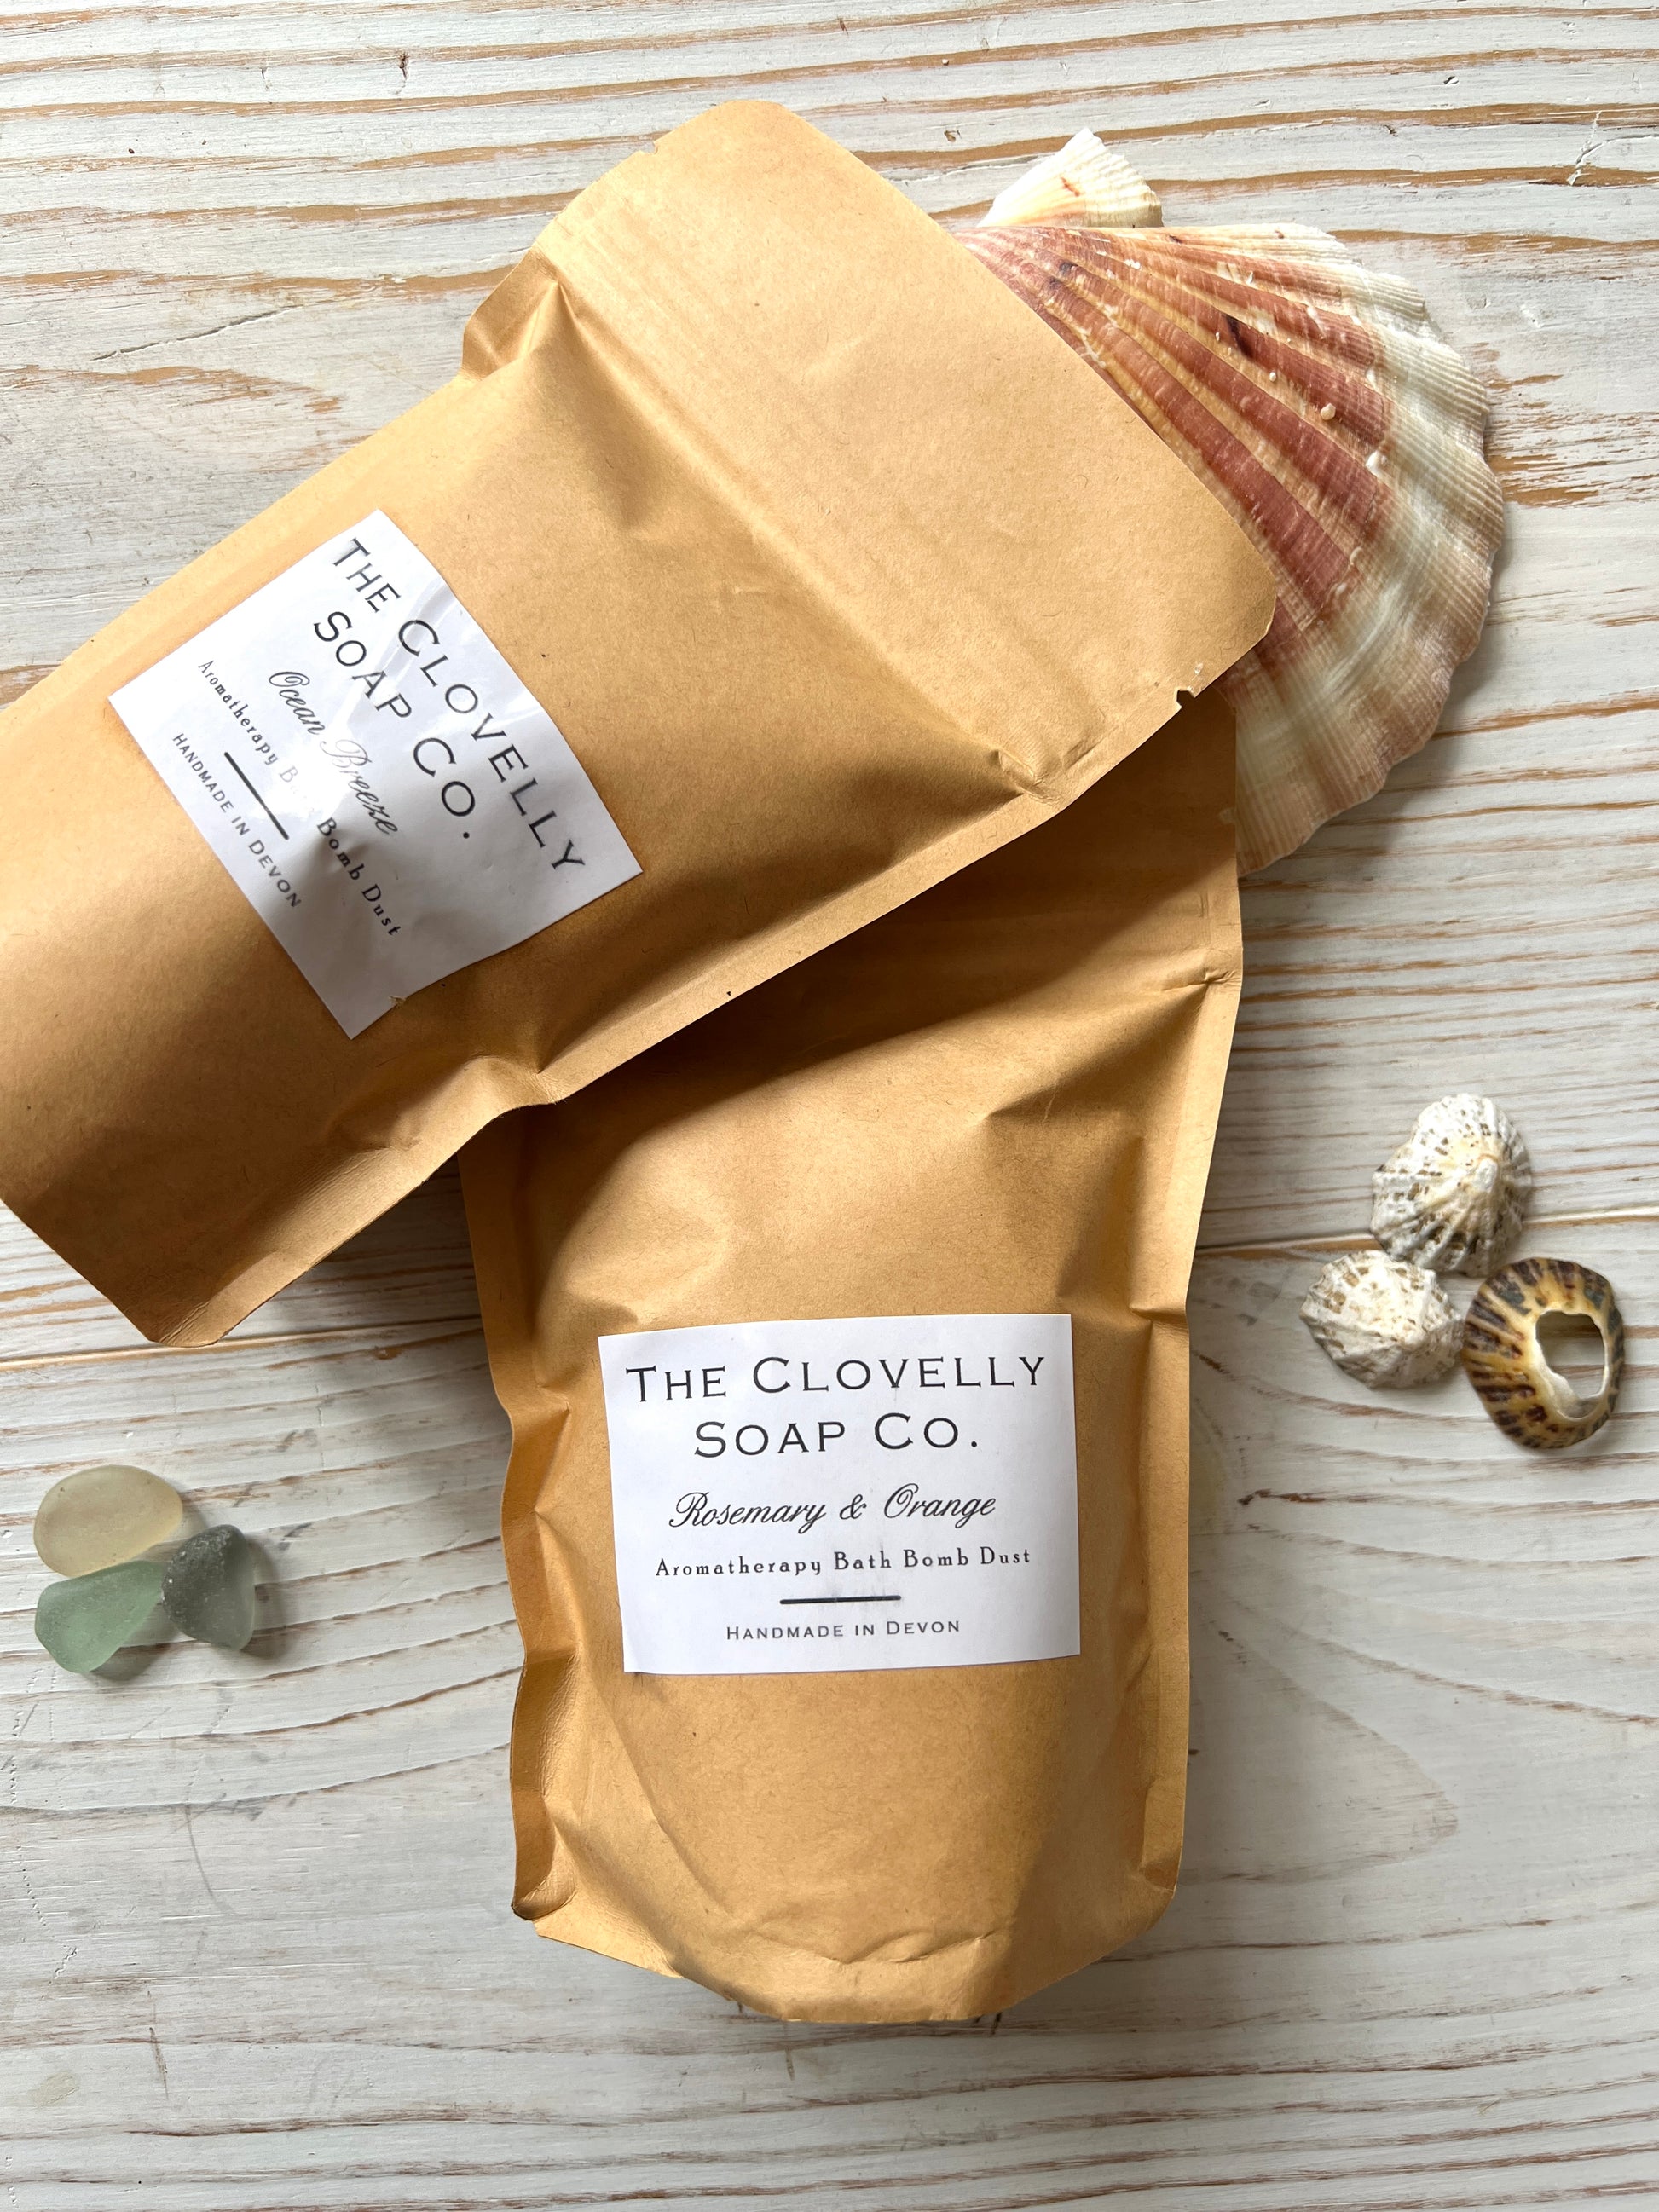 Paper bags of Aromatherapy bath bomb dust made in Devon